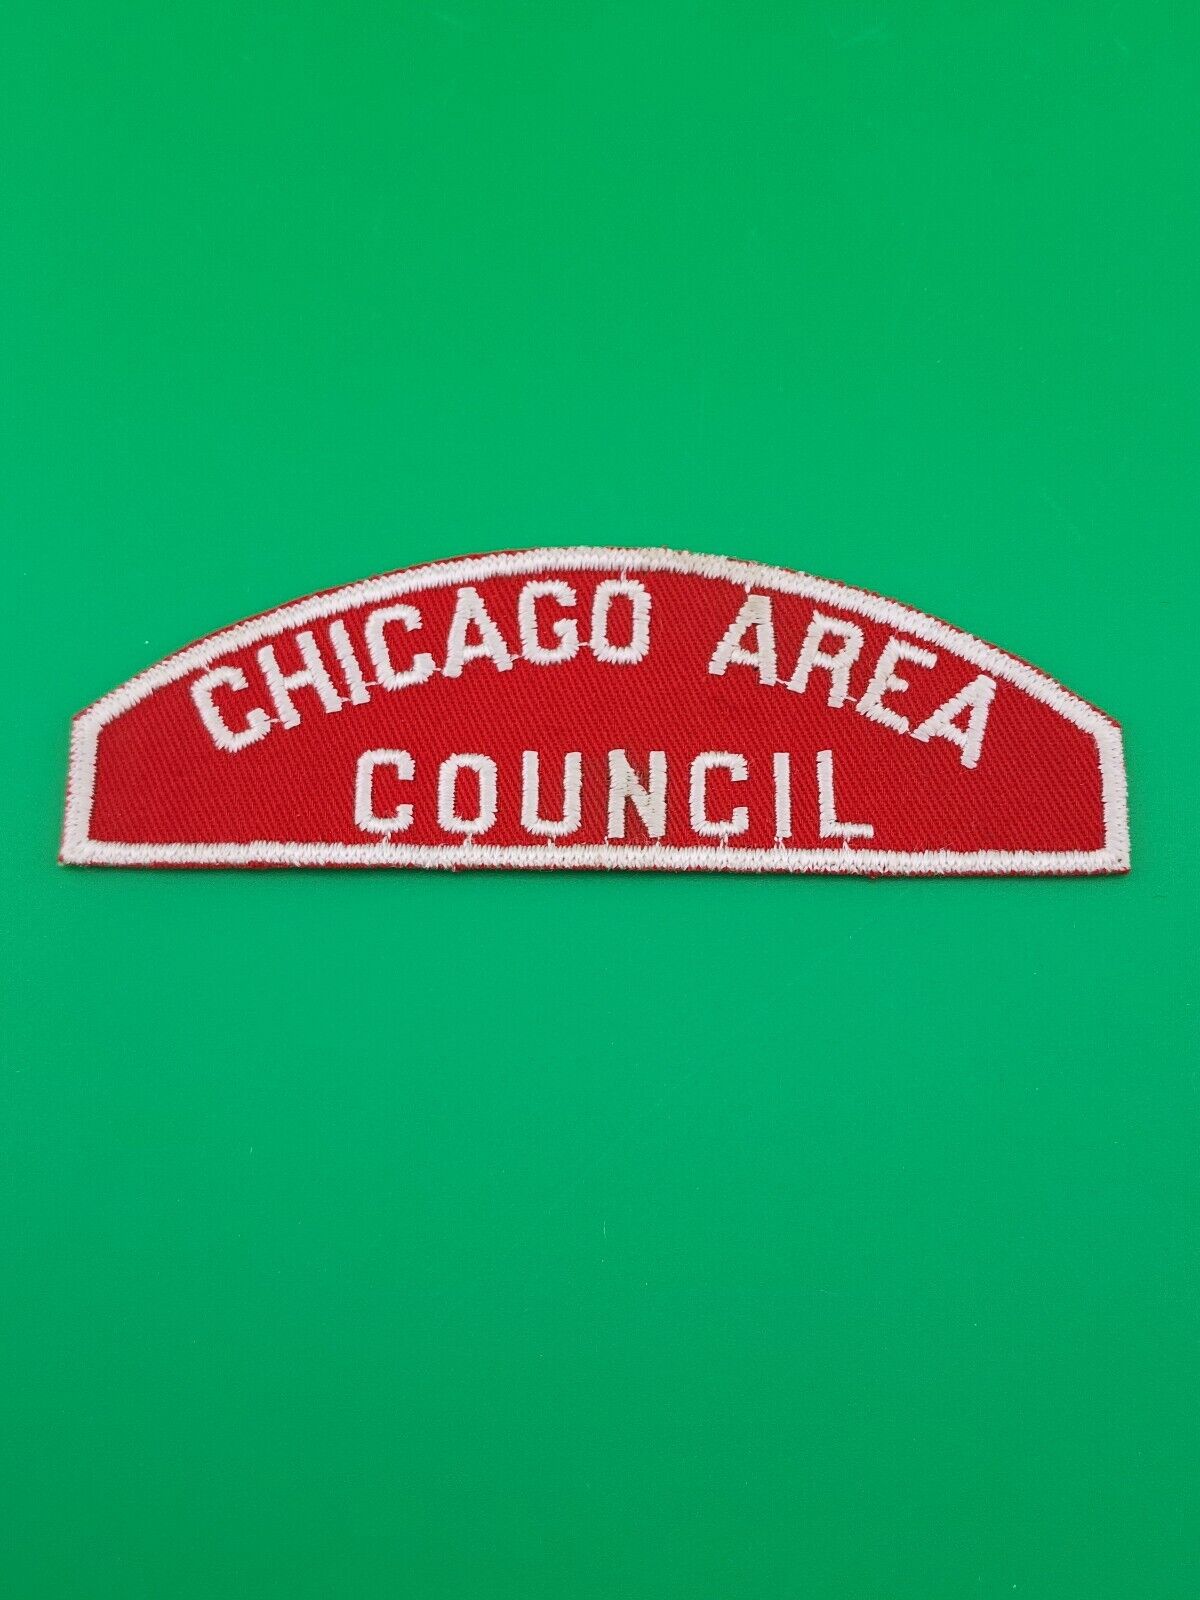 Chicago Area Council Red & White Shoulder Flap Patch BSA Boy Scouts America NEW